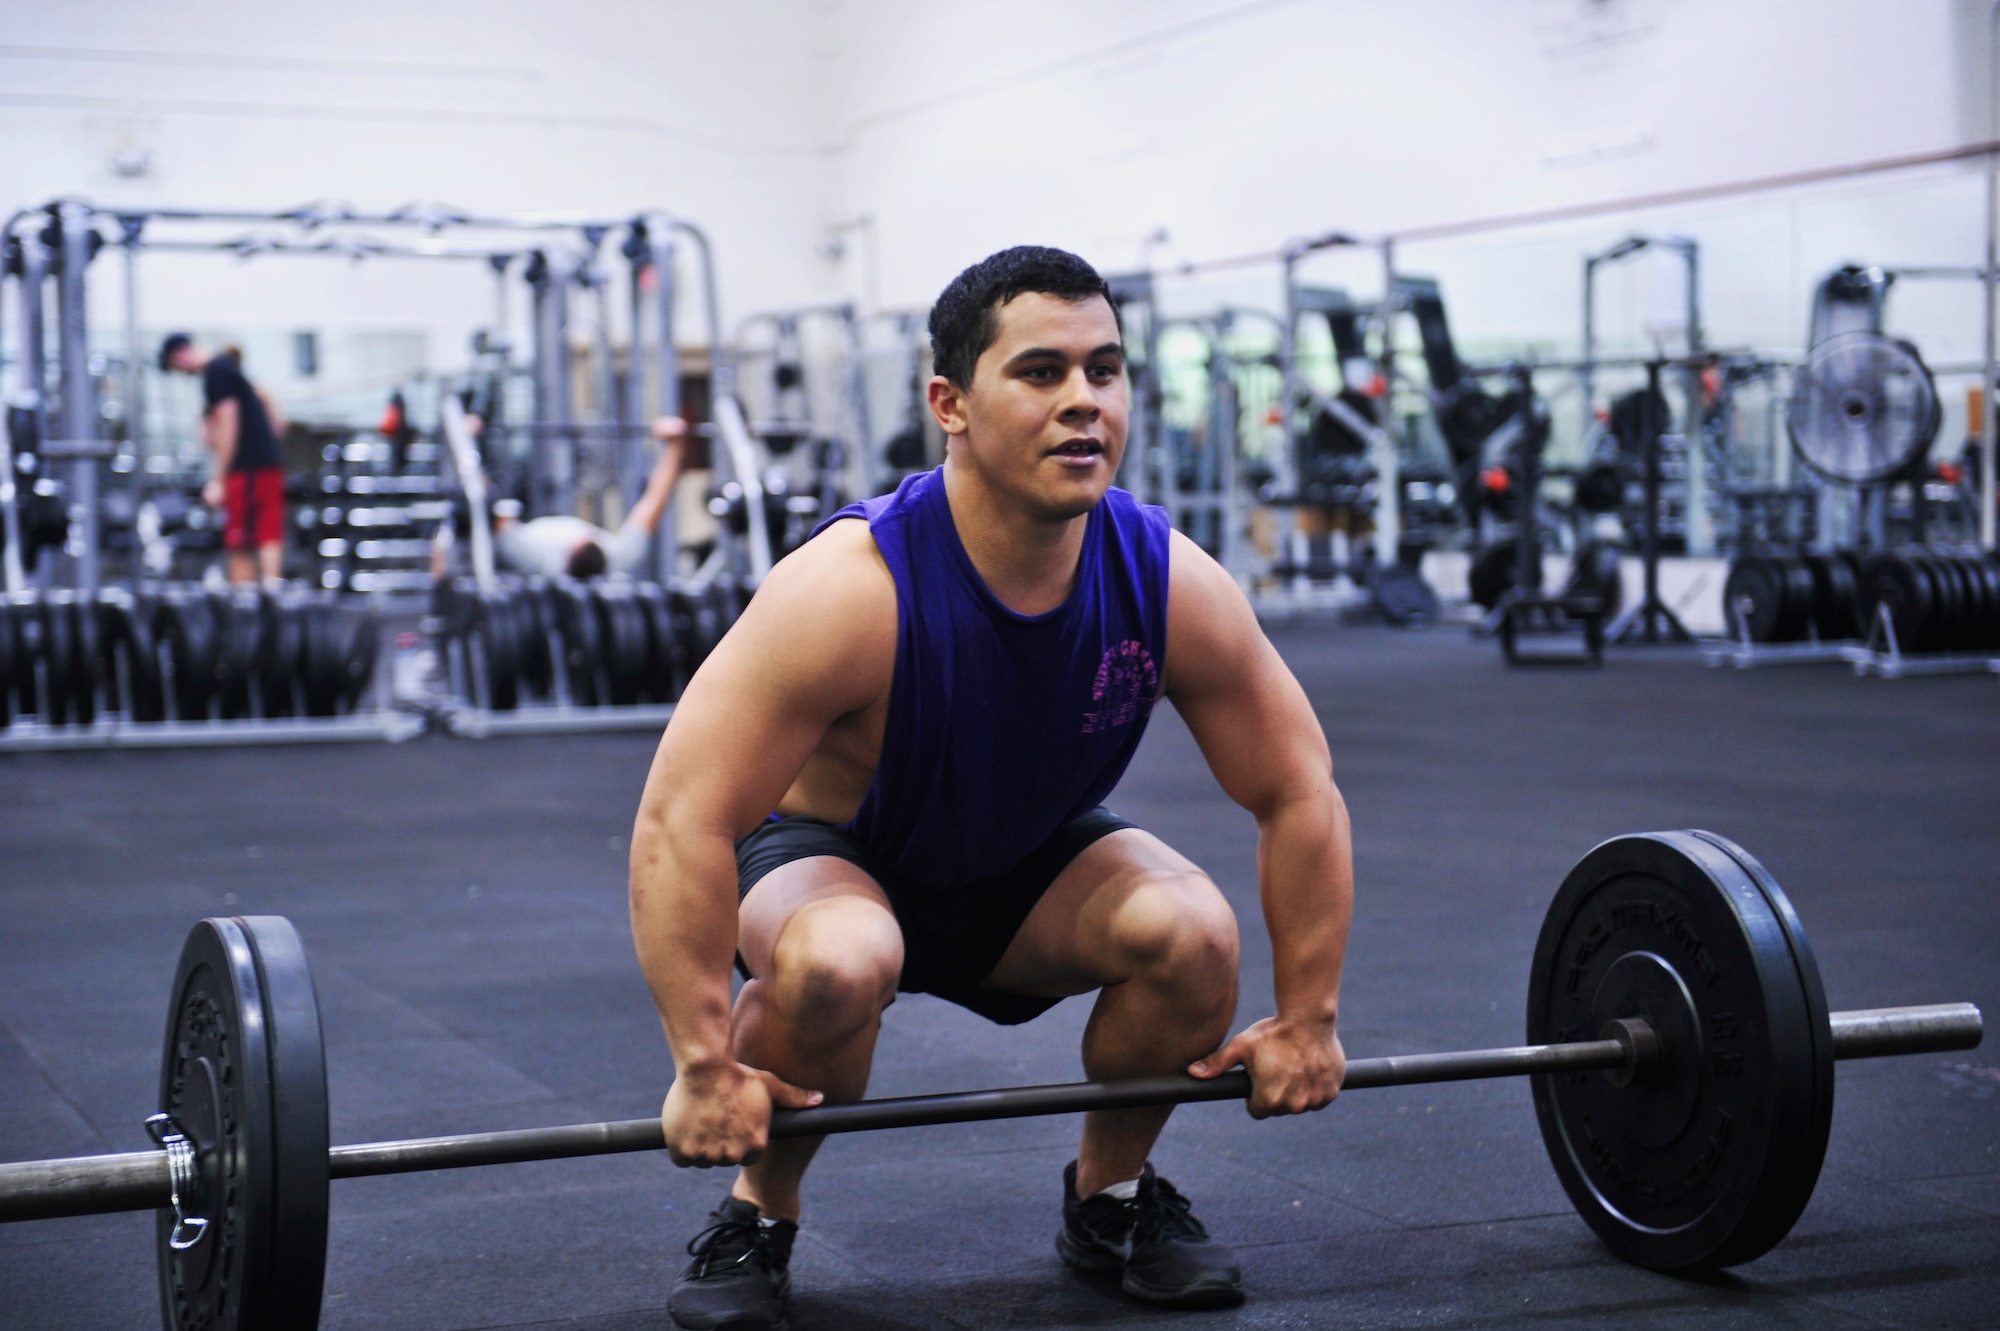 Senior Airman Jelani Acevedo-Morales, 1st Special Operations Security Forces Squadron Deployed Aircraft Ground Response Elements team member, prepares for a clean and jerk at Hurlburt Field, Fla., April 7, 2014. Common access cardholders can use the gym after-hours once they sign a statement of understanding, which outlines the program rules.
 (U.S. Air Force photo/Staff Sgt. John Bainter)
